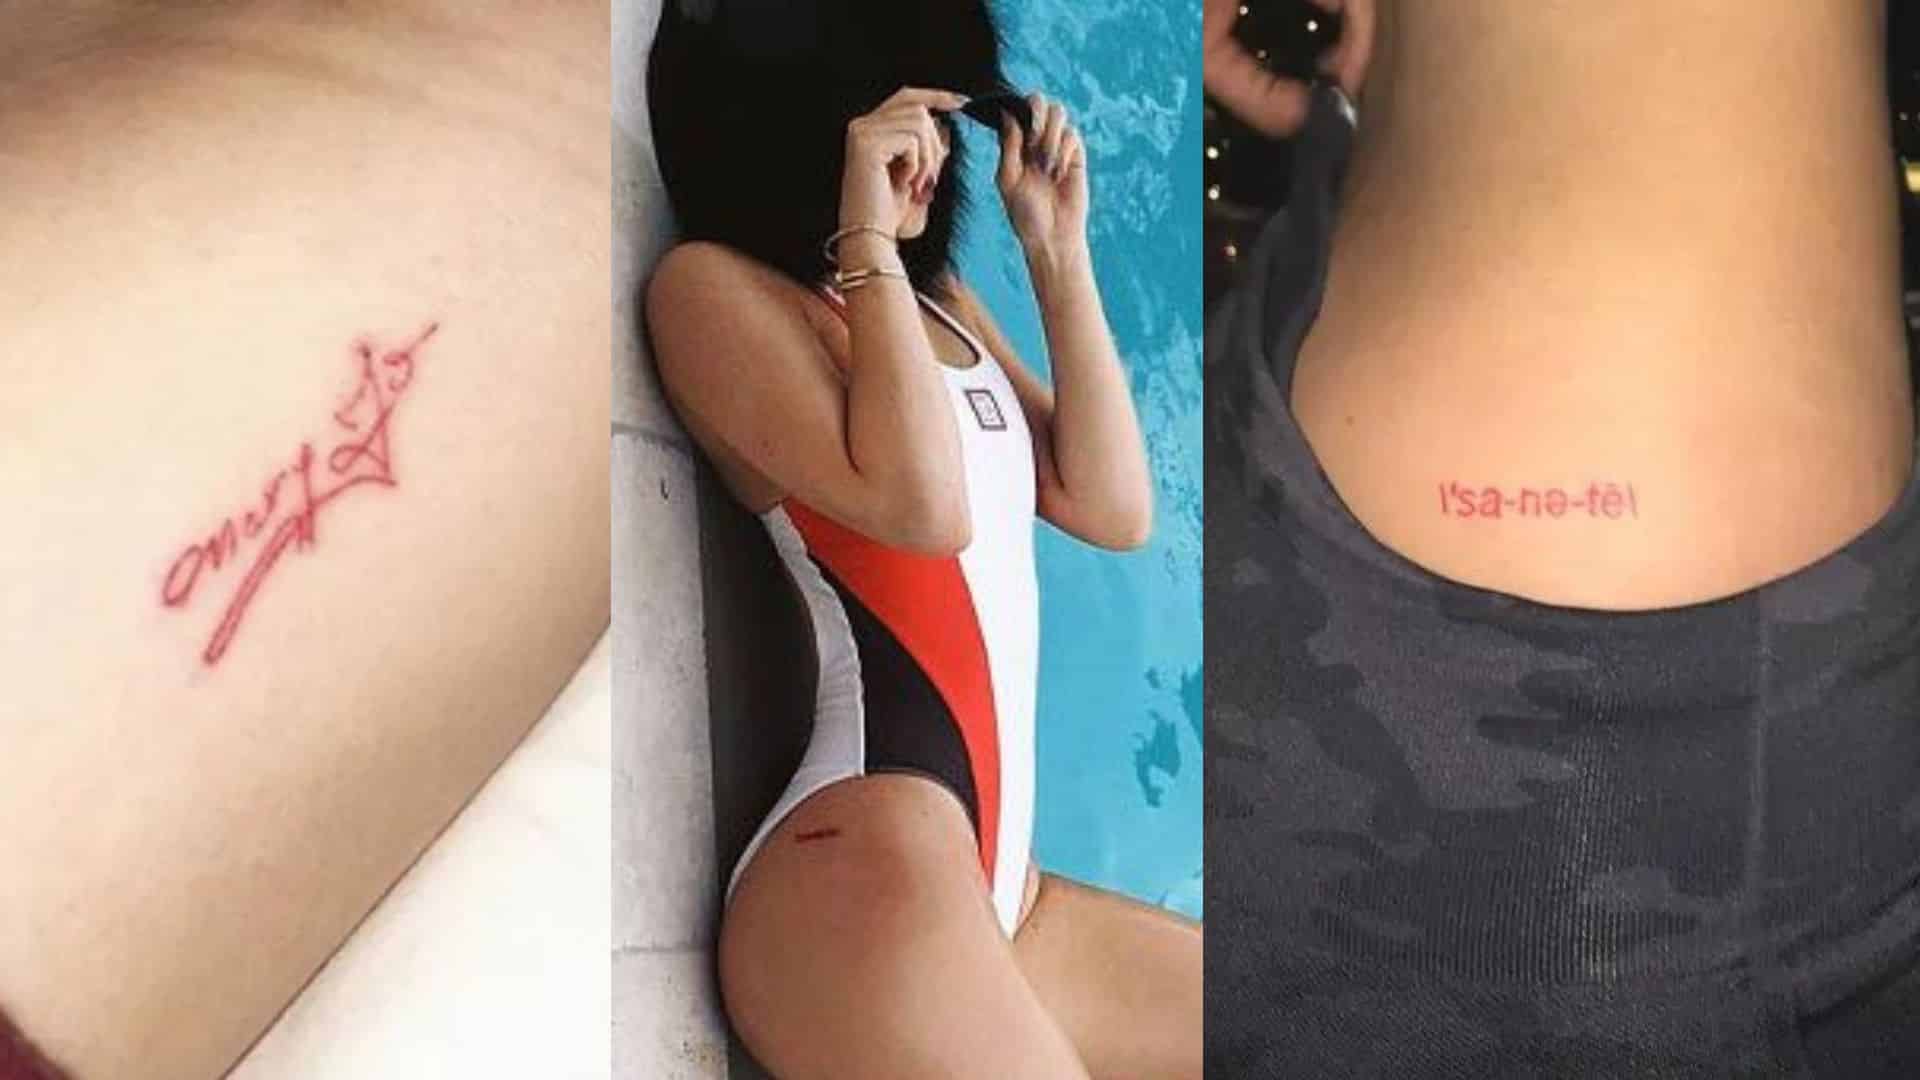 Kylie Jenner’s meaningful tattoos